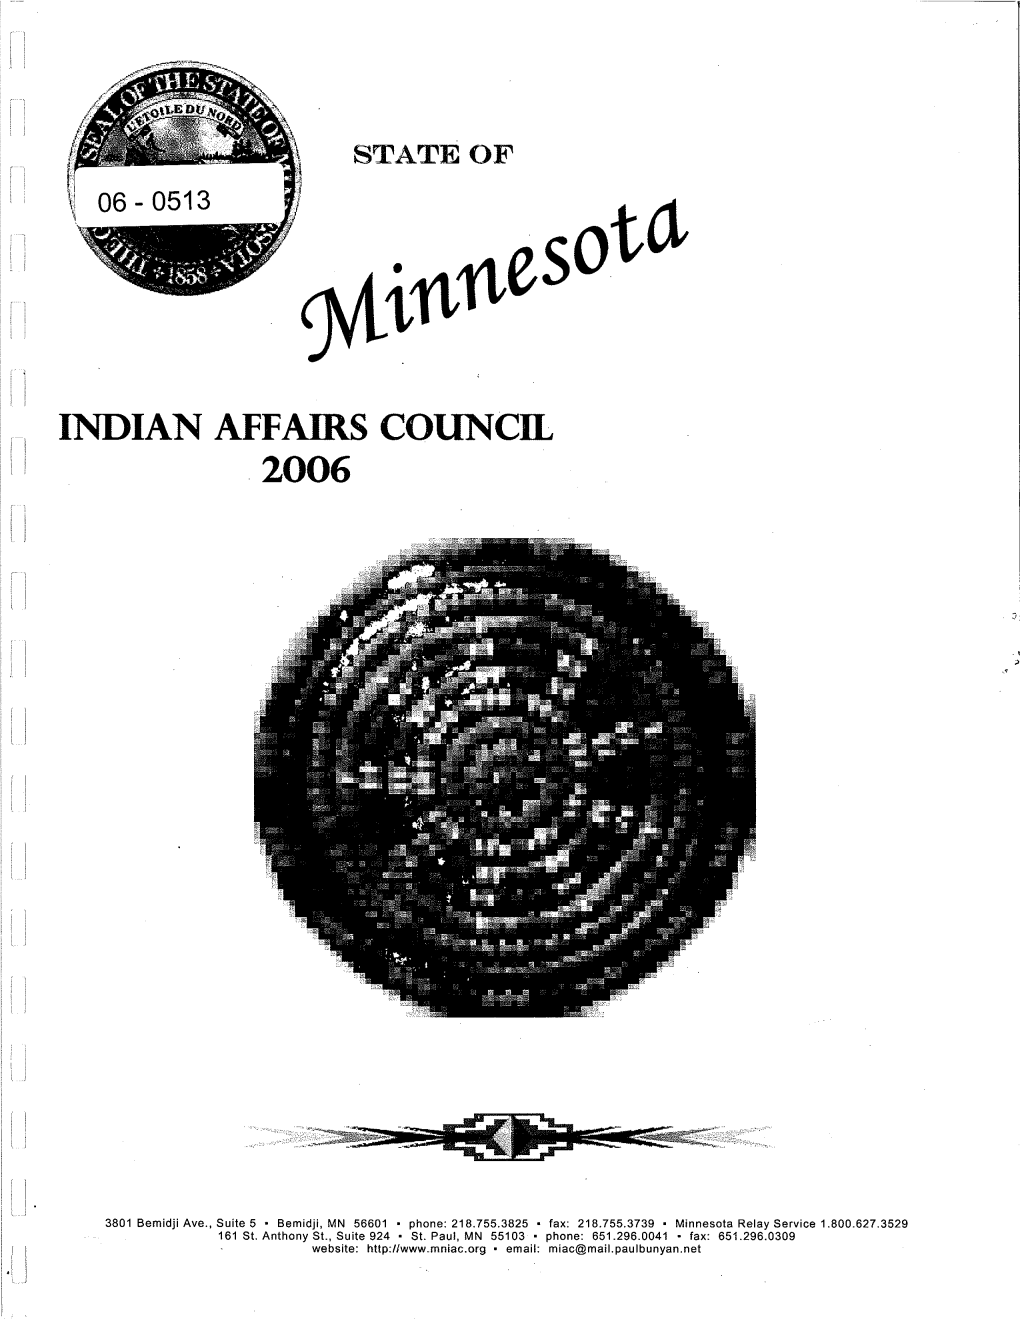 Indian Affairs Council 2006